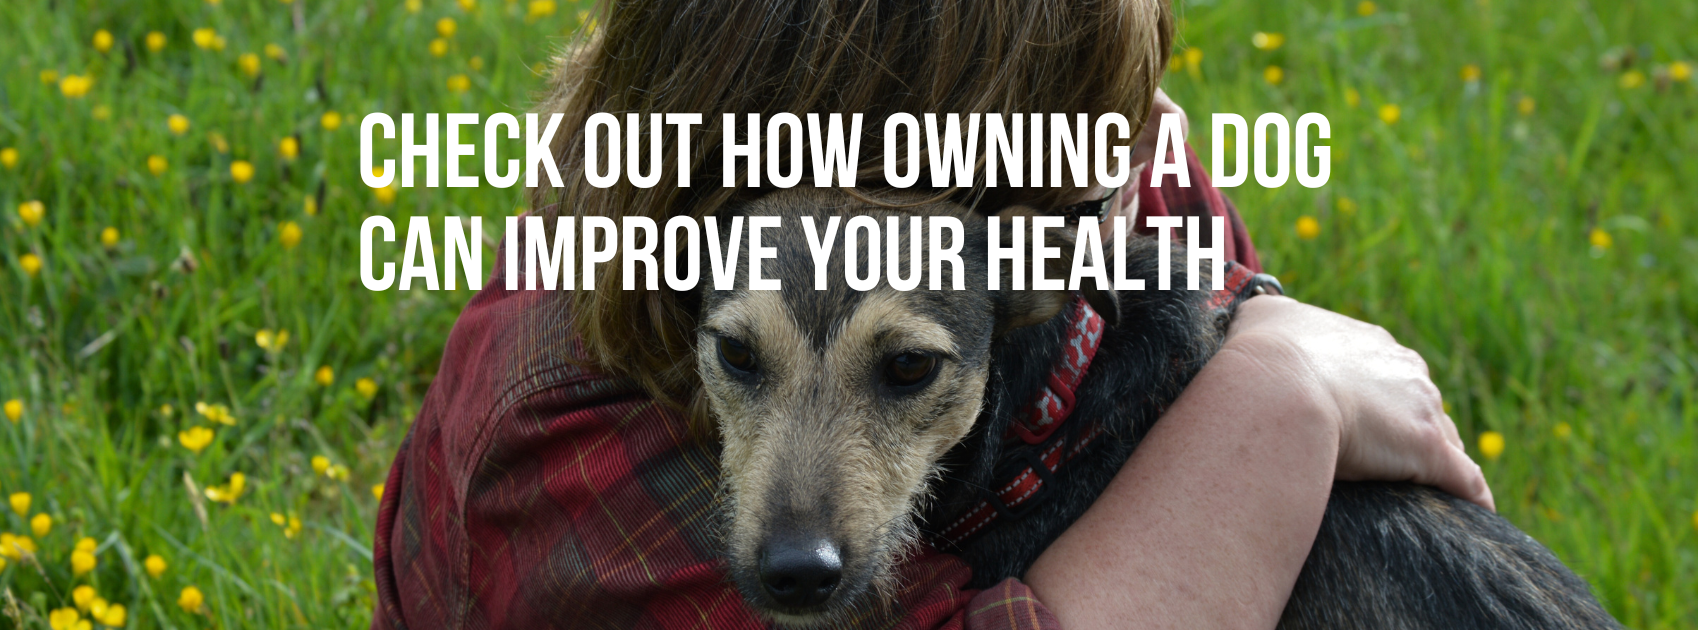 CHECK OUT HOW OWNING A DOG CAN IMPROVE YOUR HEALTH